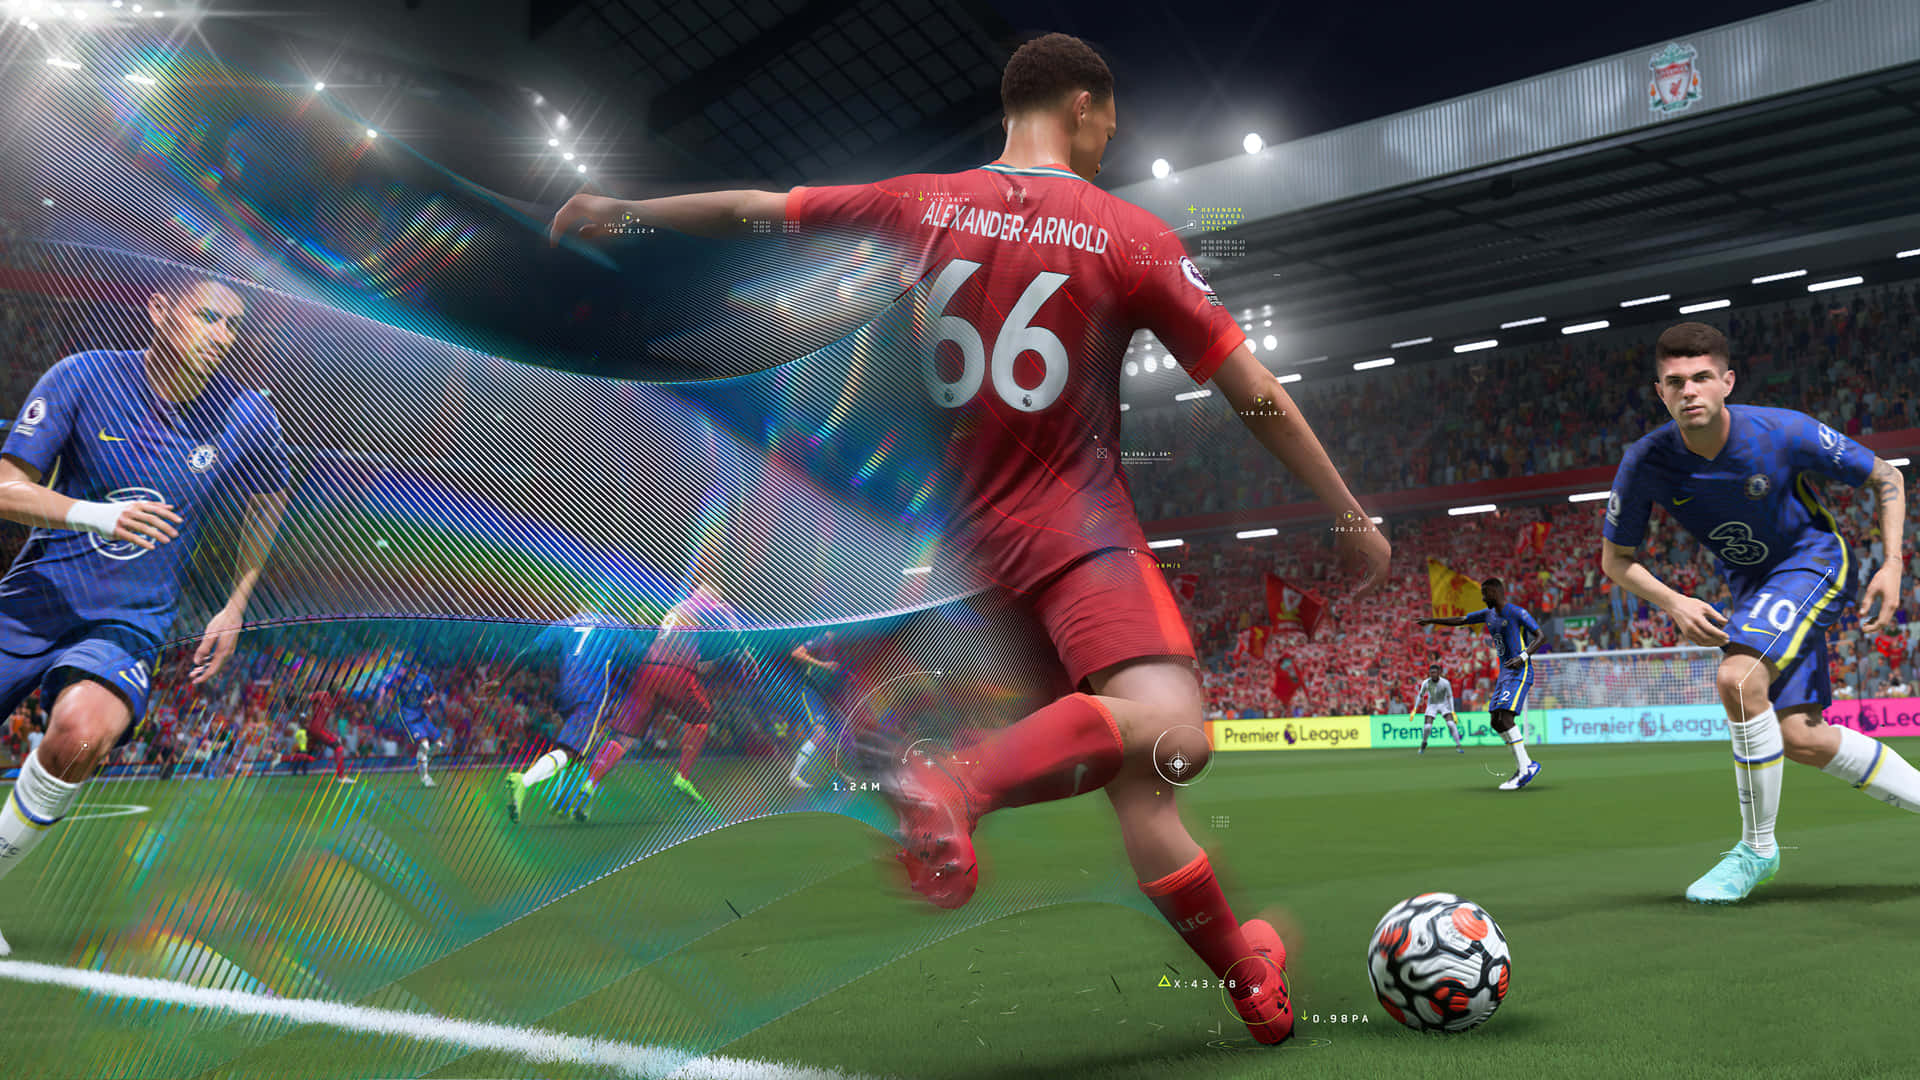 FIFA 22 Action-packed Gameplay on Display Wallpaper